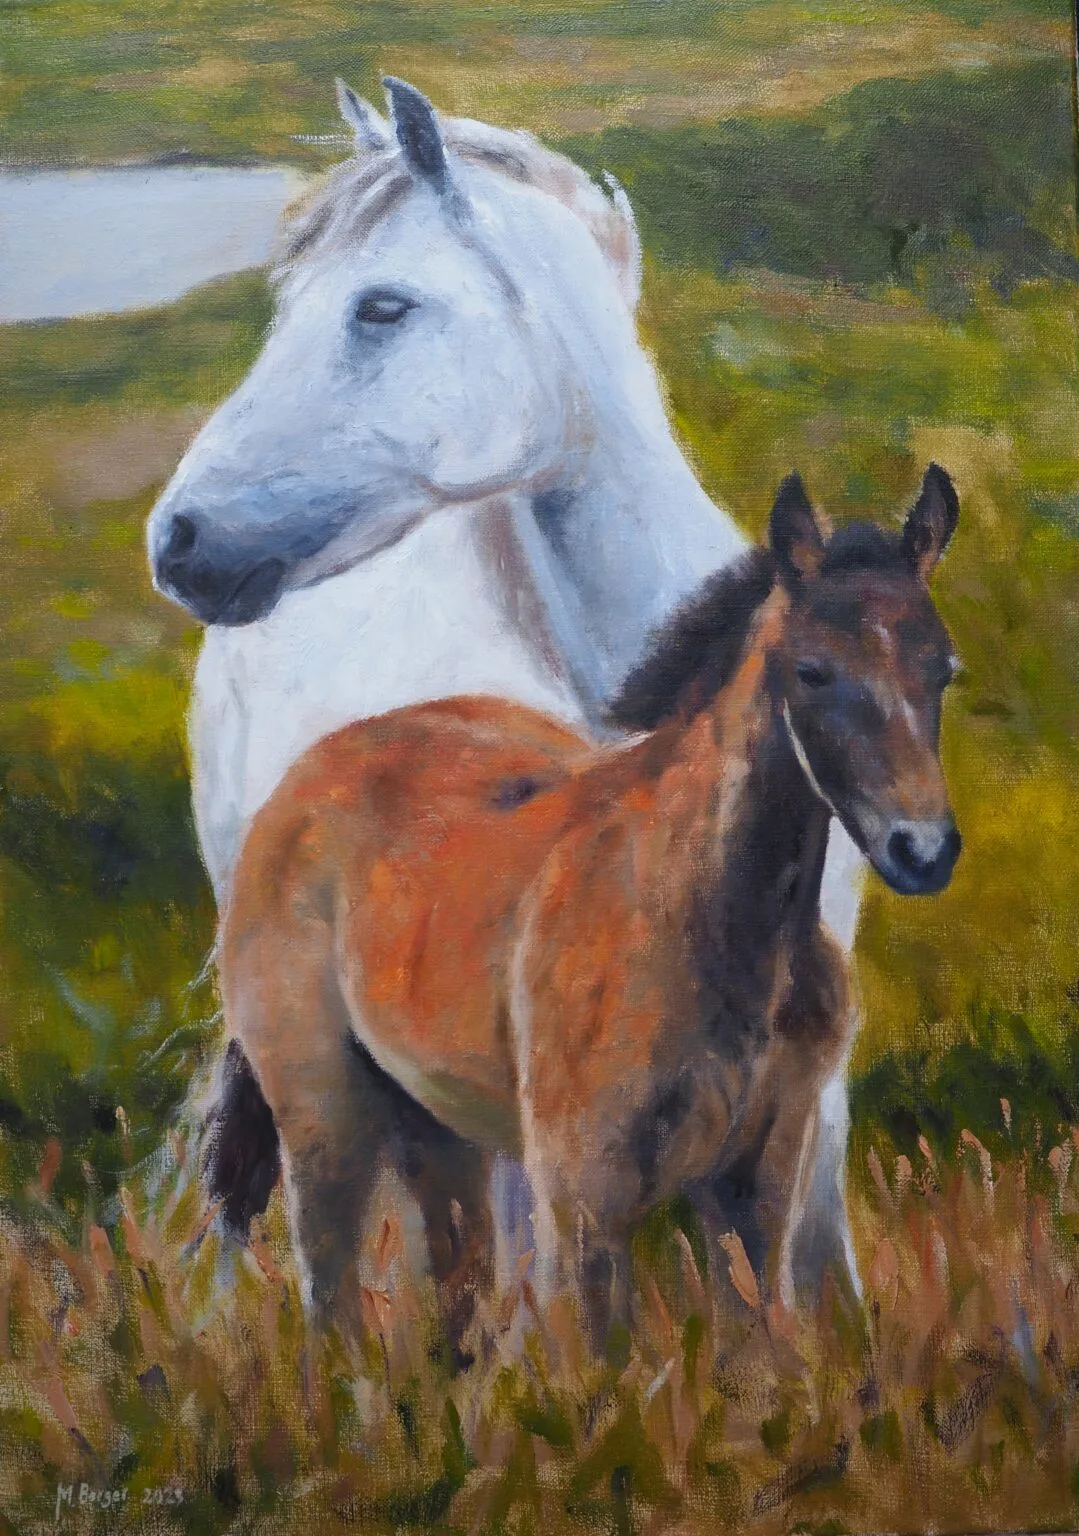 Two horses, scene from Ireland, 2023 oil painting, 50x70cm